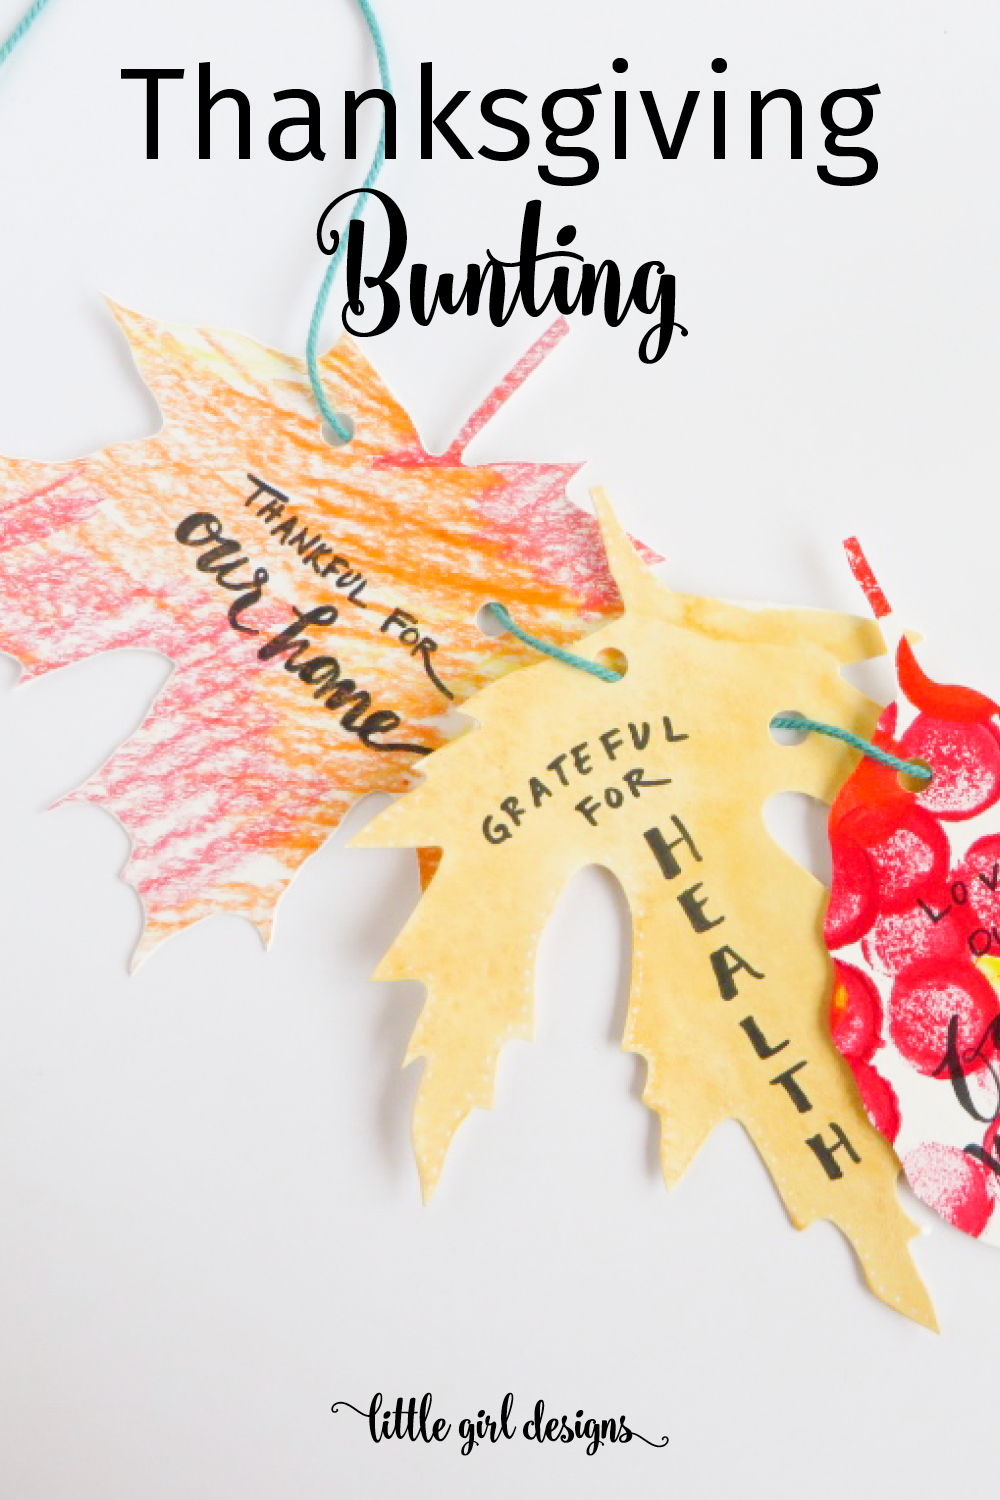 Make this Thanksgiving bunting with your family this year. This crafter shares several variations on how to make this work, and it's such a great tradition to do together!